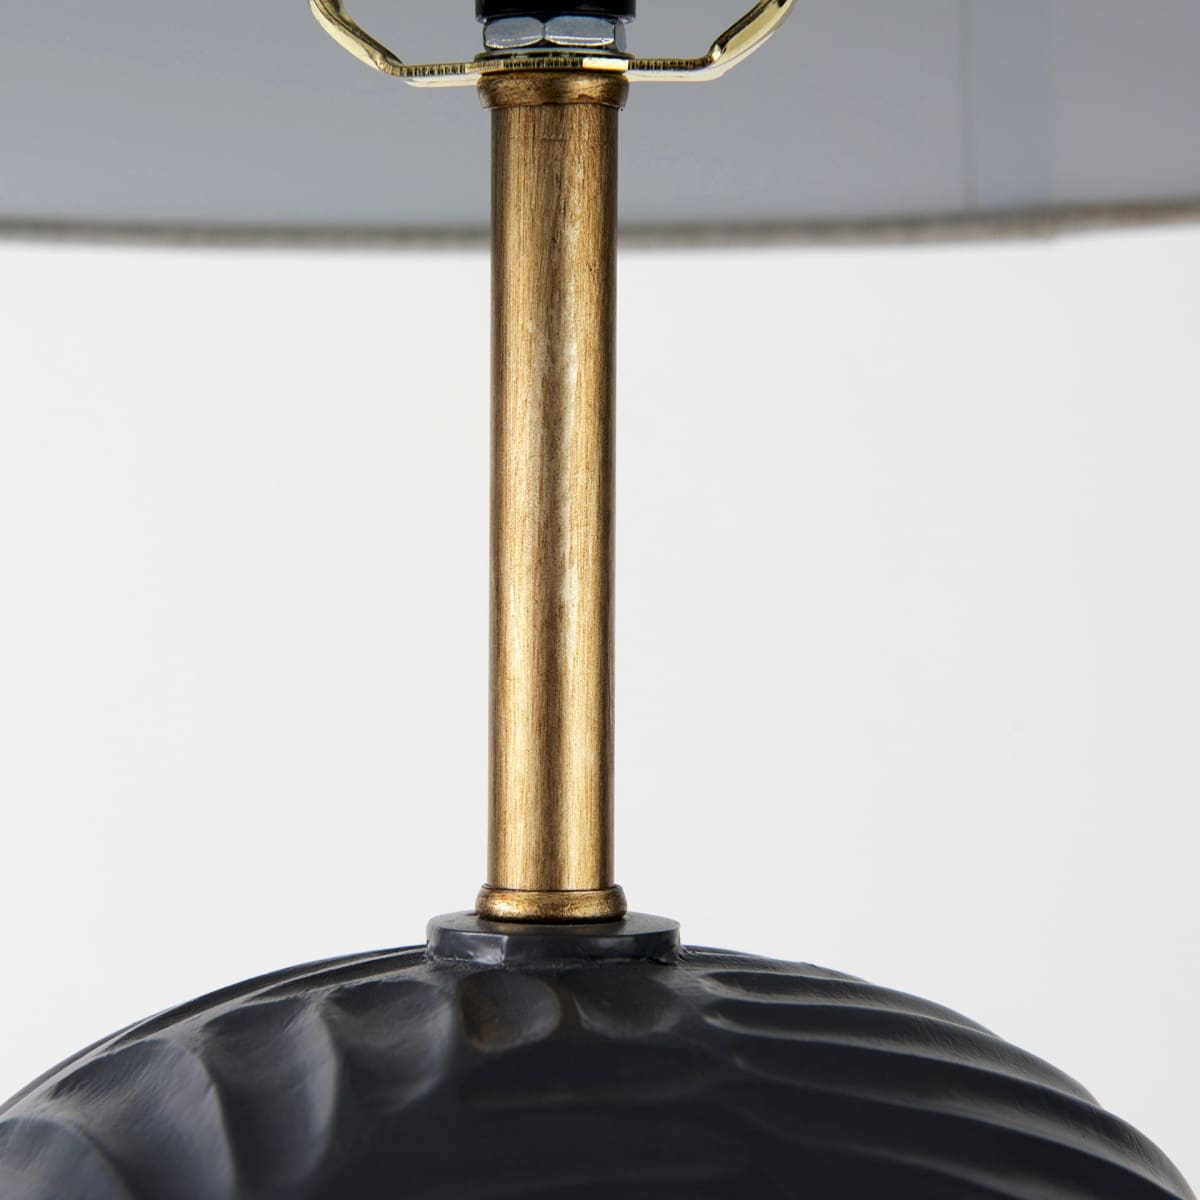 Quinn Table Lamp Navy | Beige Shade - table-lamps